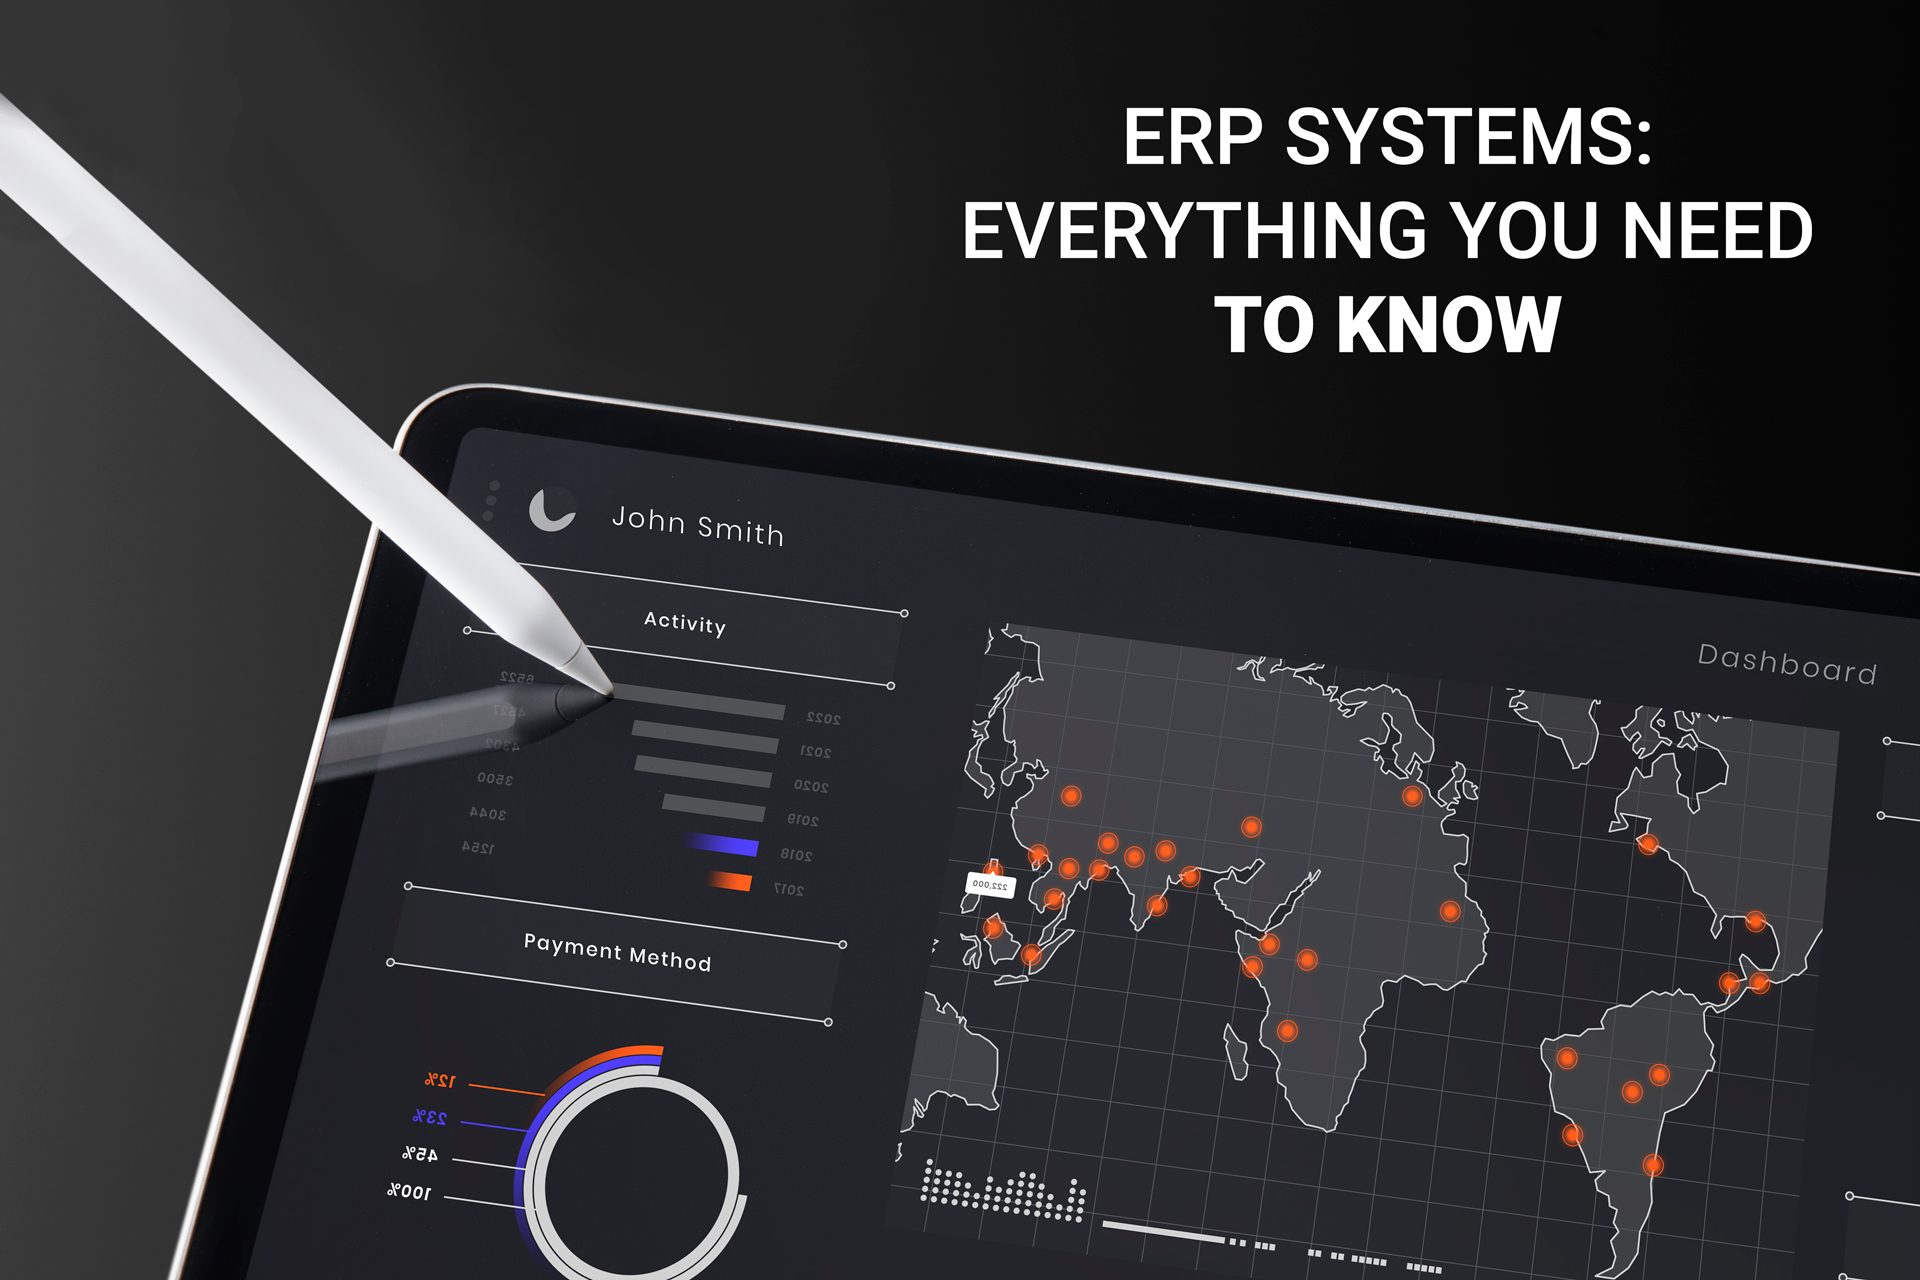 ERP Systems: Everything You Need to Know